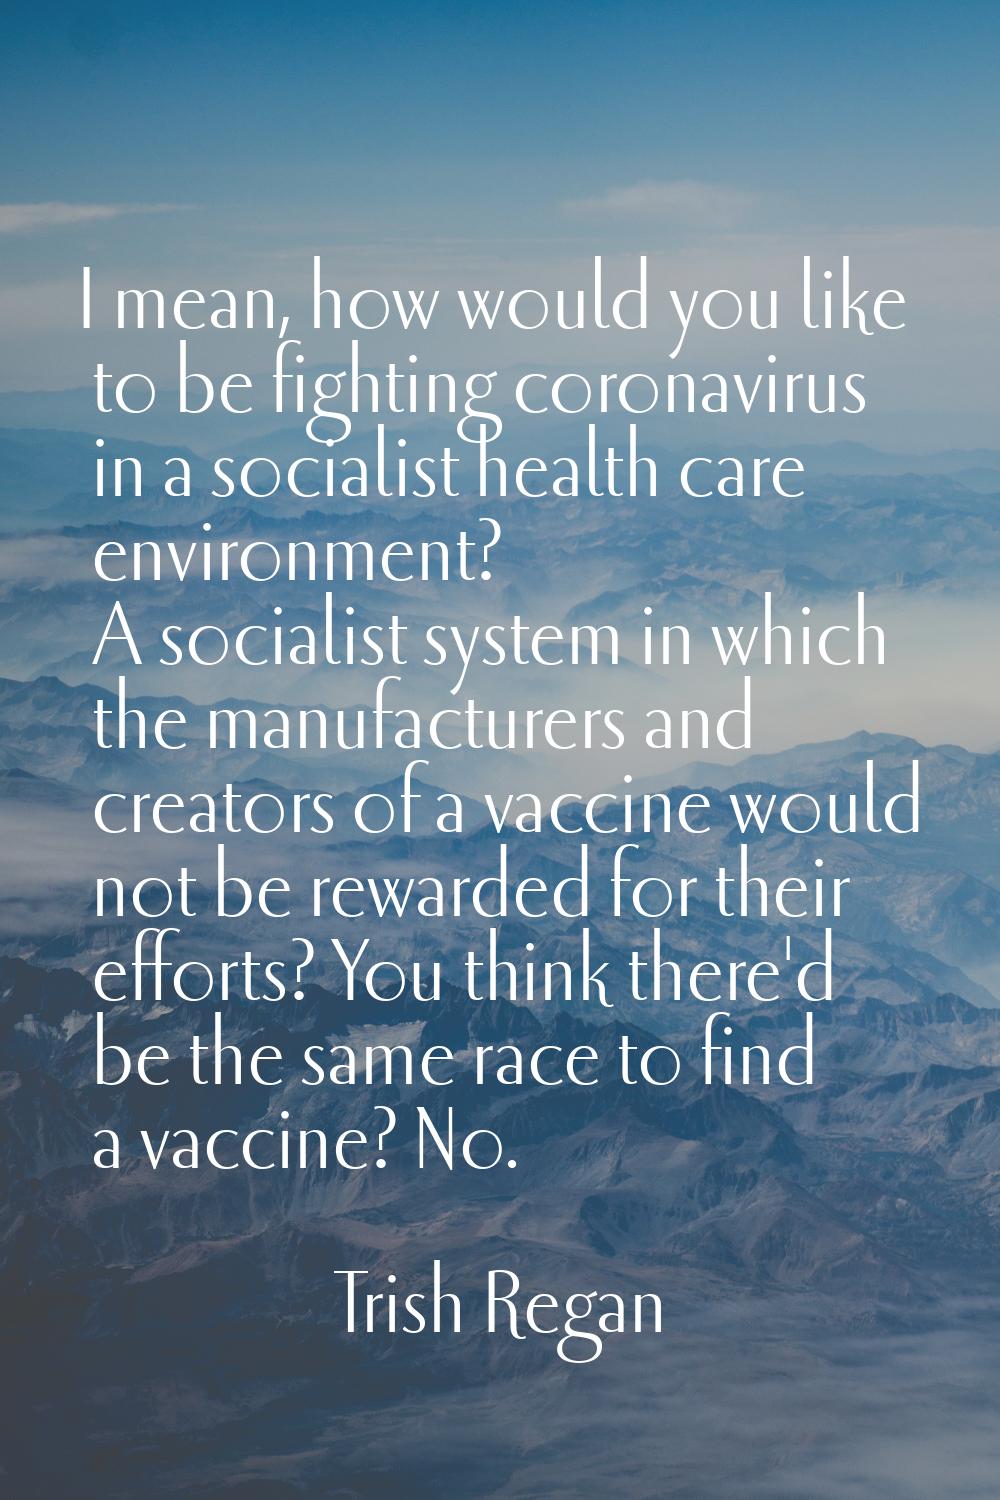 I mean, how would you like to be fighting coronavirus in a socialist health care environment? A soc